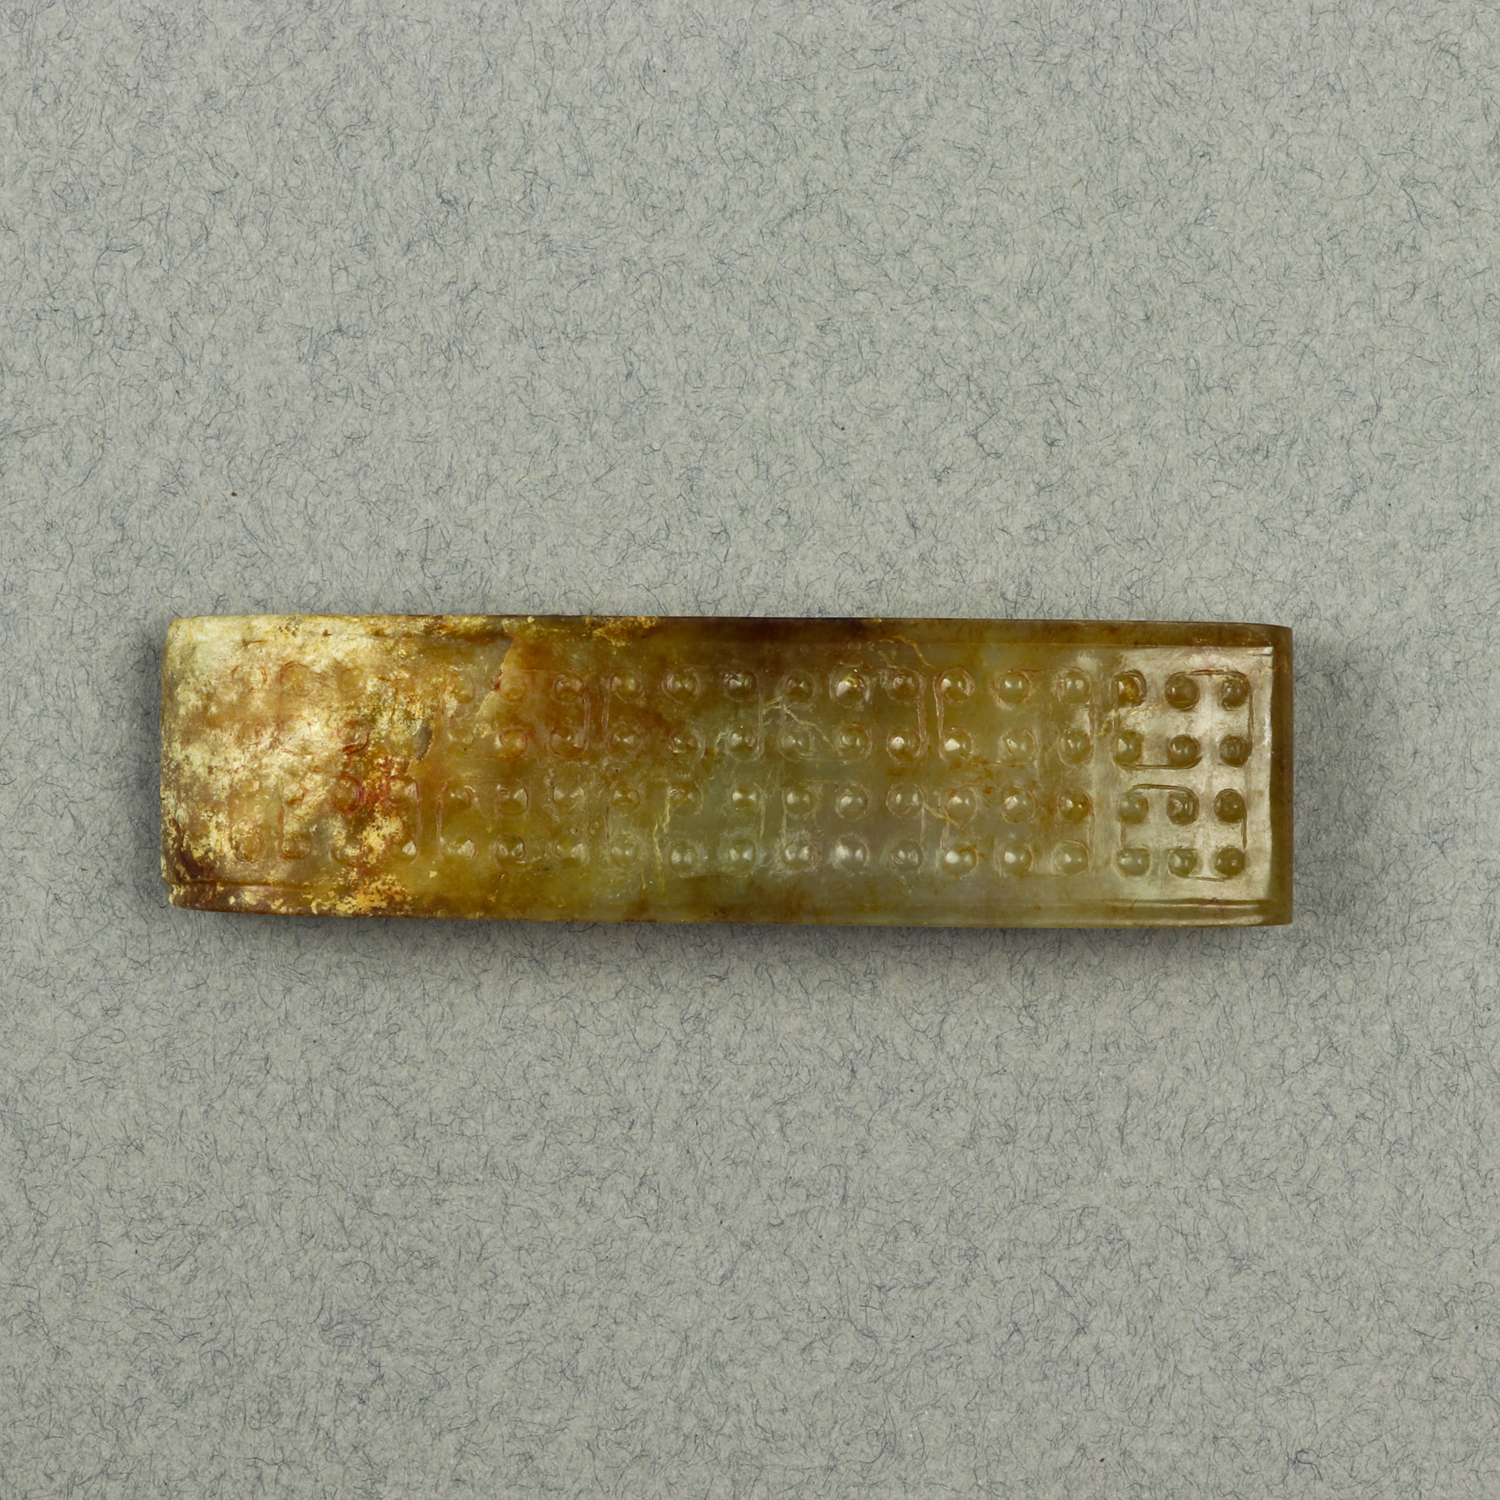 CHINESE JADE ARCHAISTIC SWORD SLIDE 3a5039